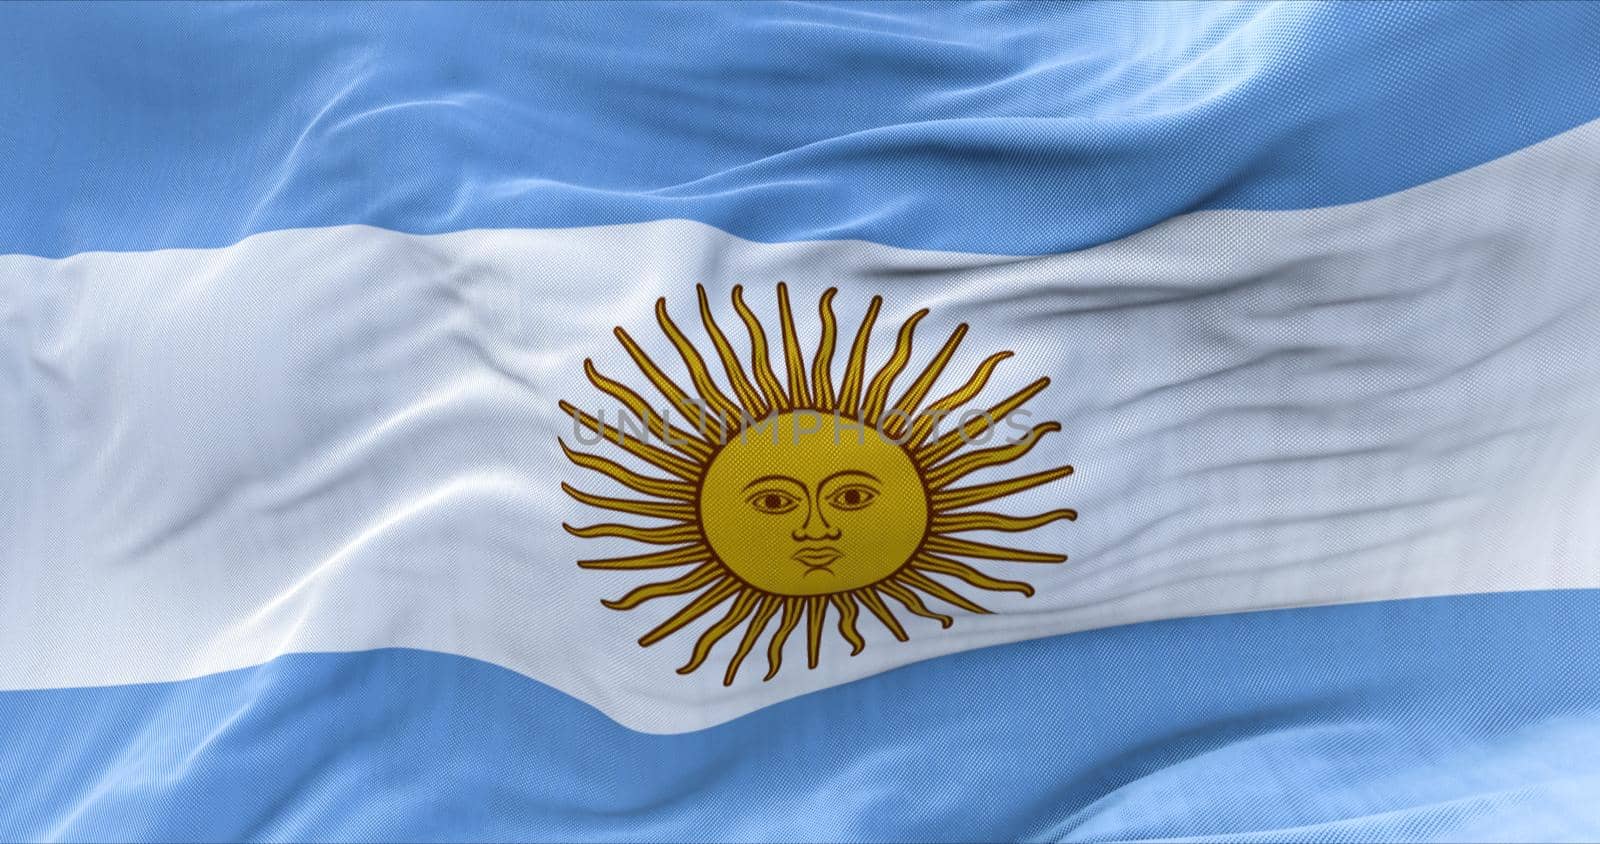 Close-up view of the national flag of Argentina waving in the wind. Horizontal striped flag in light blue color and the May Sun in the center. South American state. Democracy and independence.